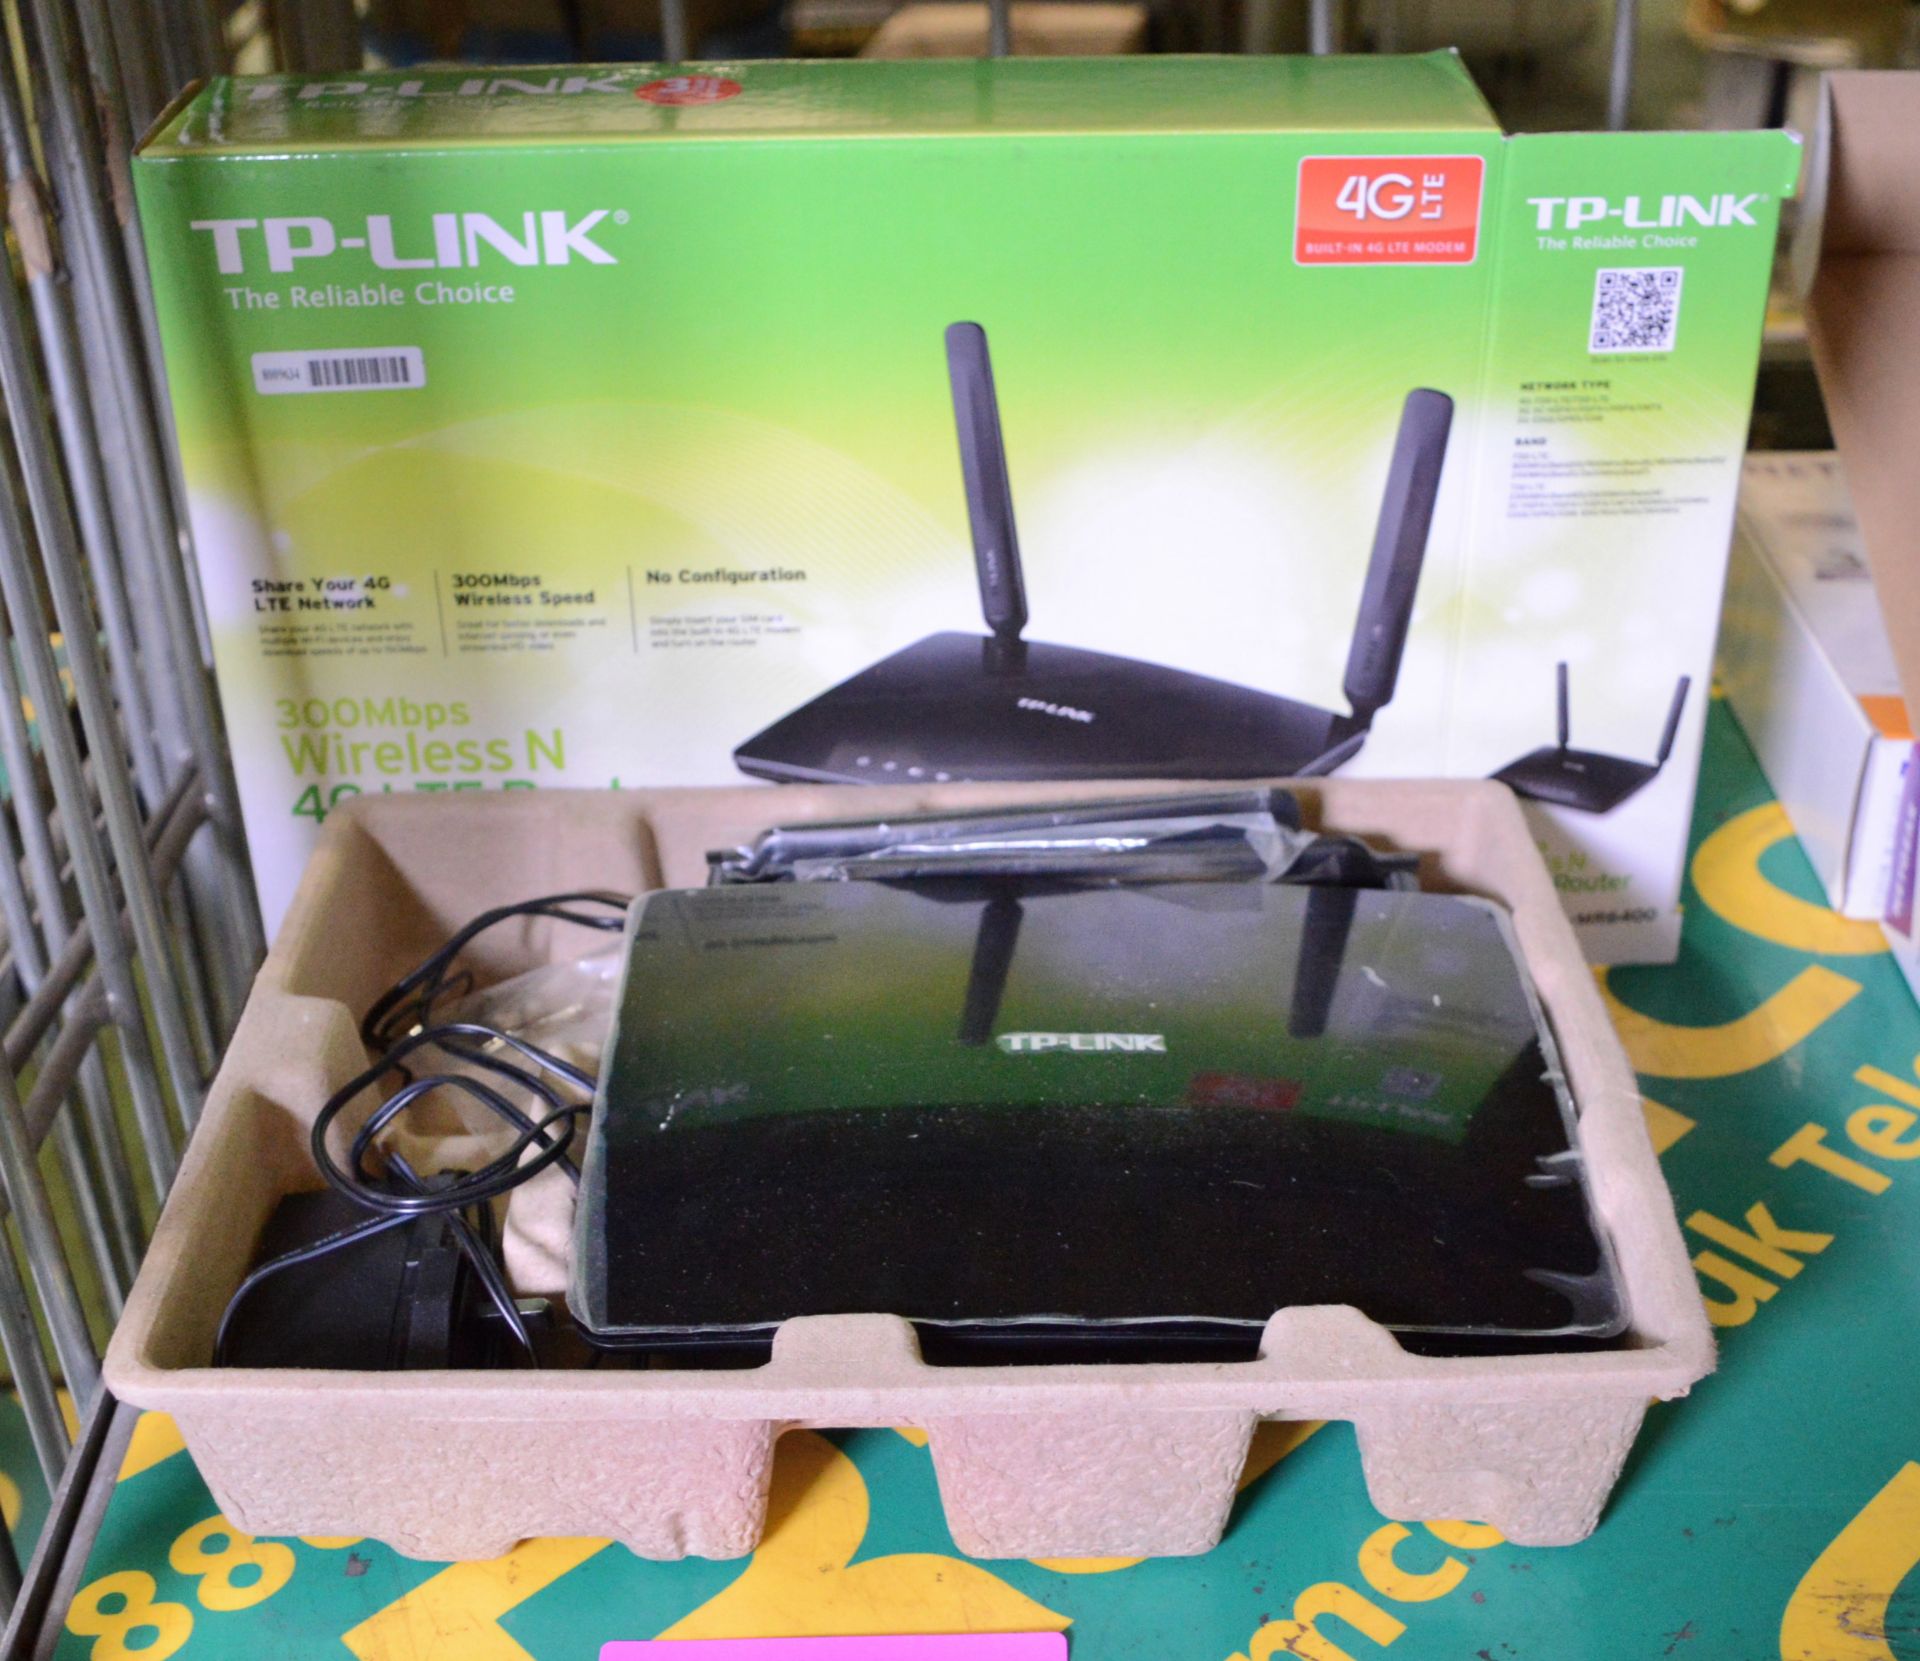 TP-Link TL-MR6400 Wireless N 4G LTE Router.